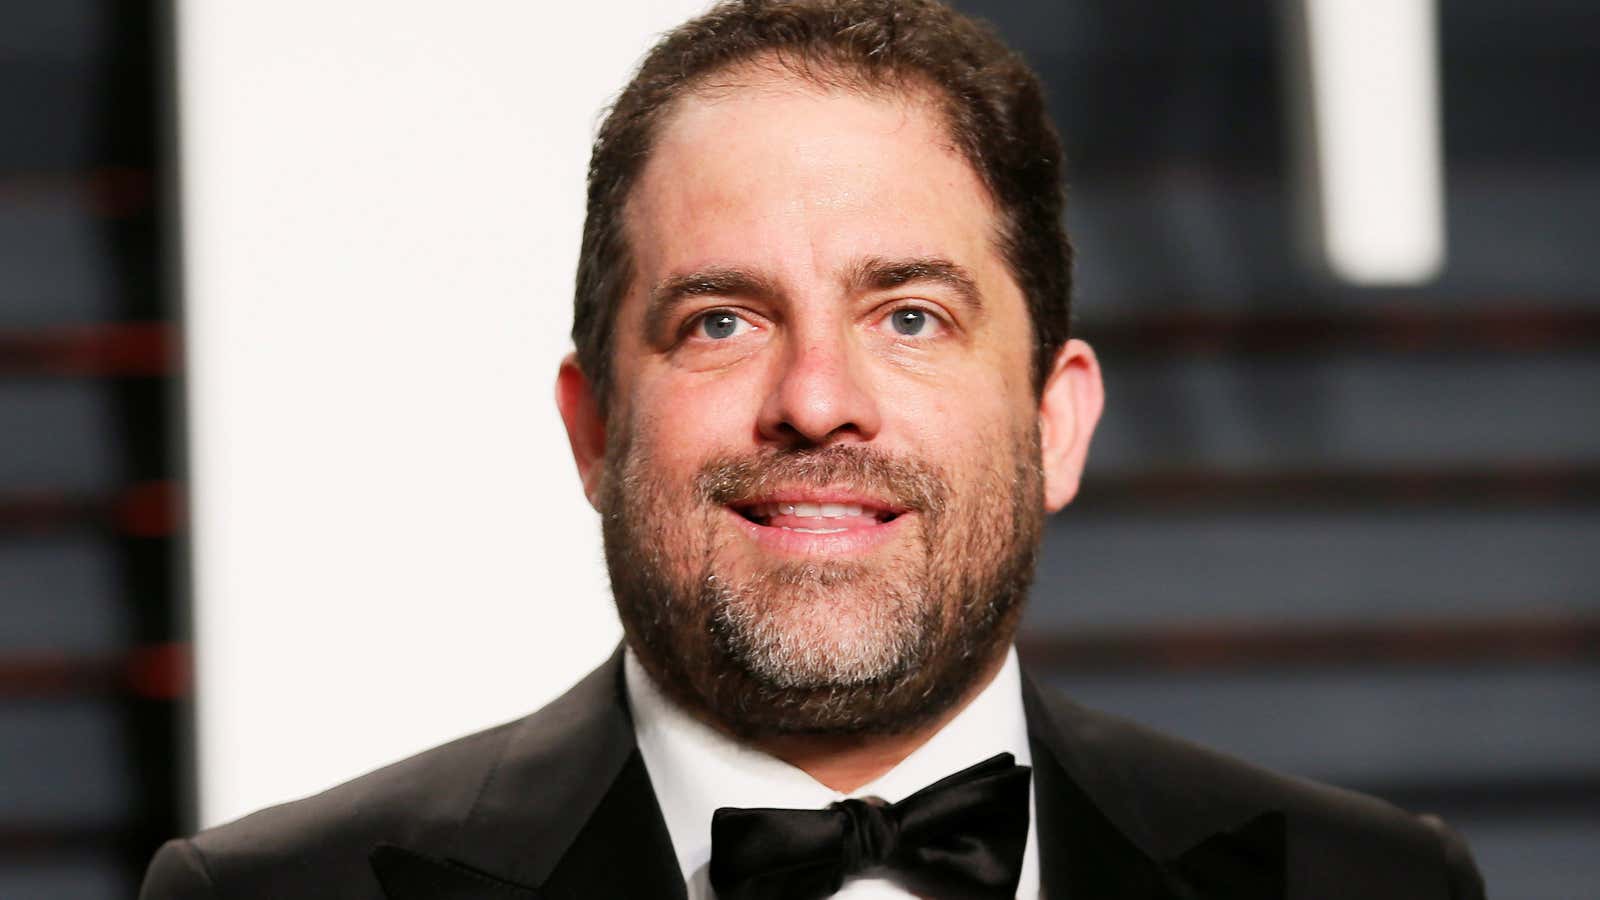 Accepting an invitation by Brett Ratner would have been a smart career move, not a reckless one.